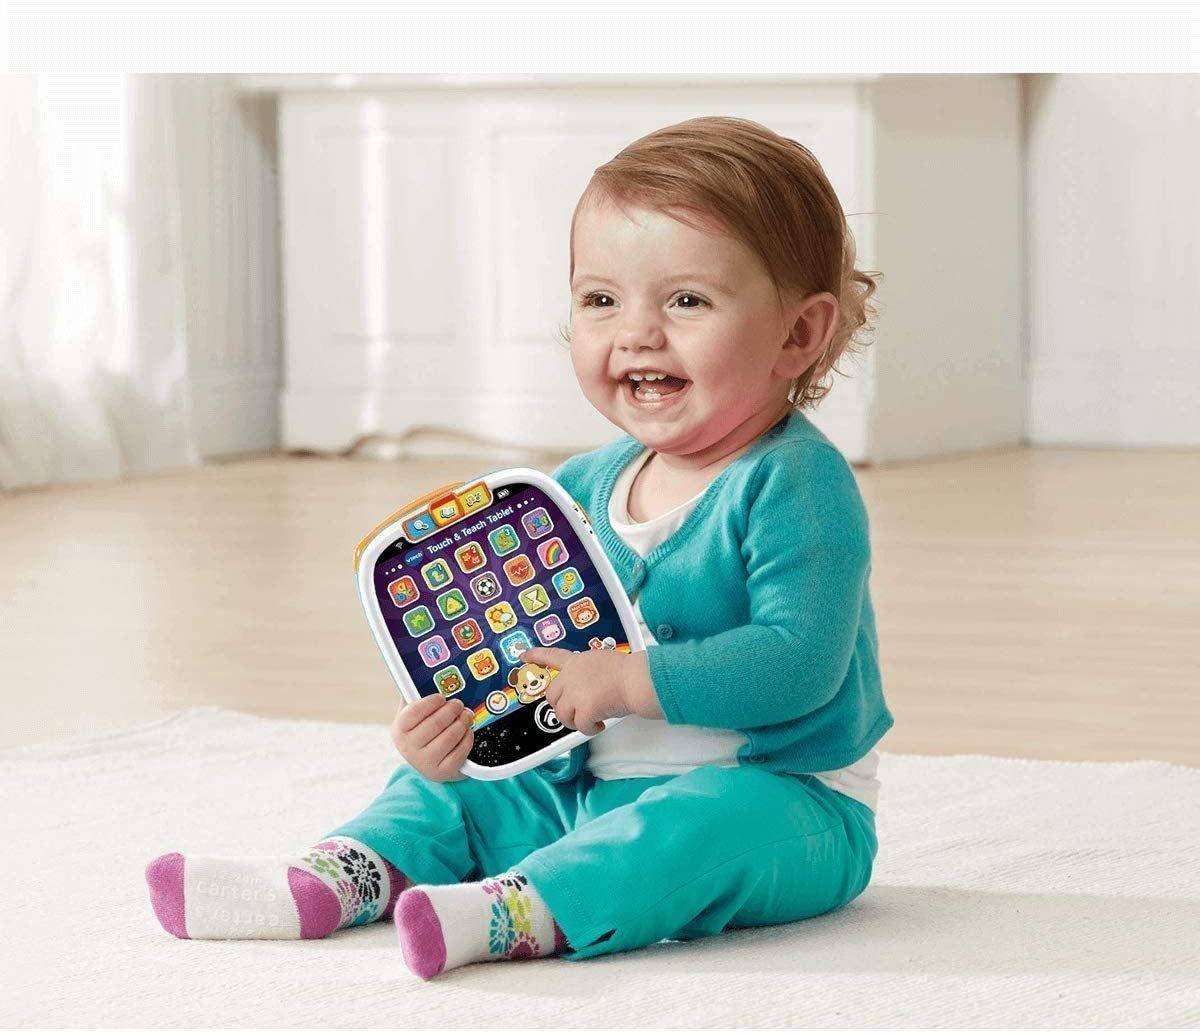 Vtech Touch & Teach Tablet Anne Claire Baby Store 